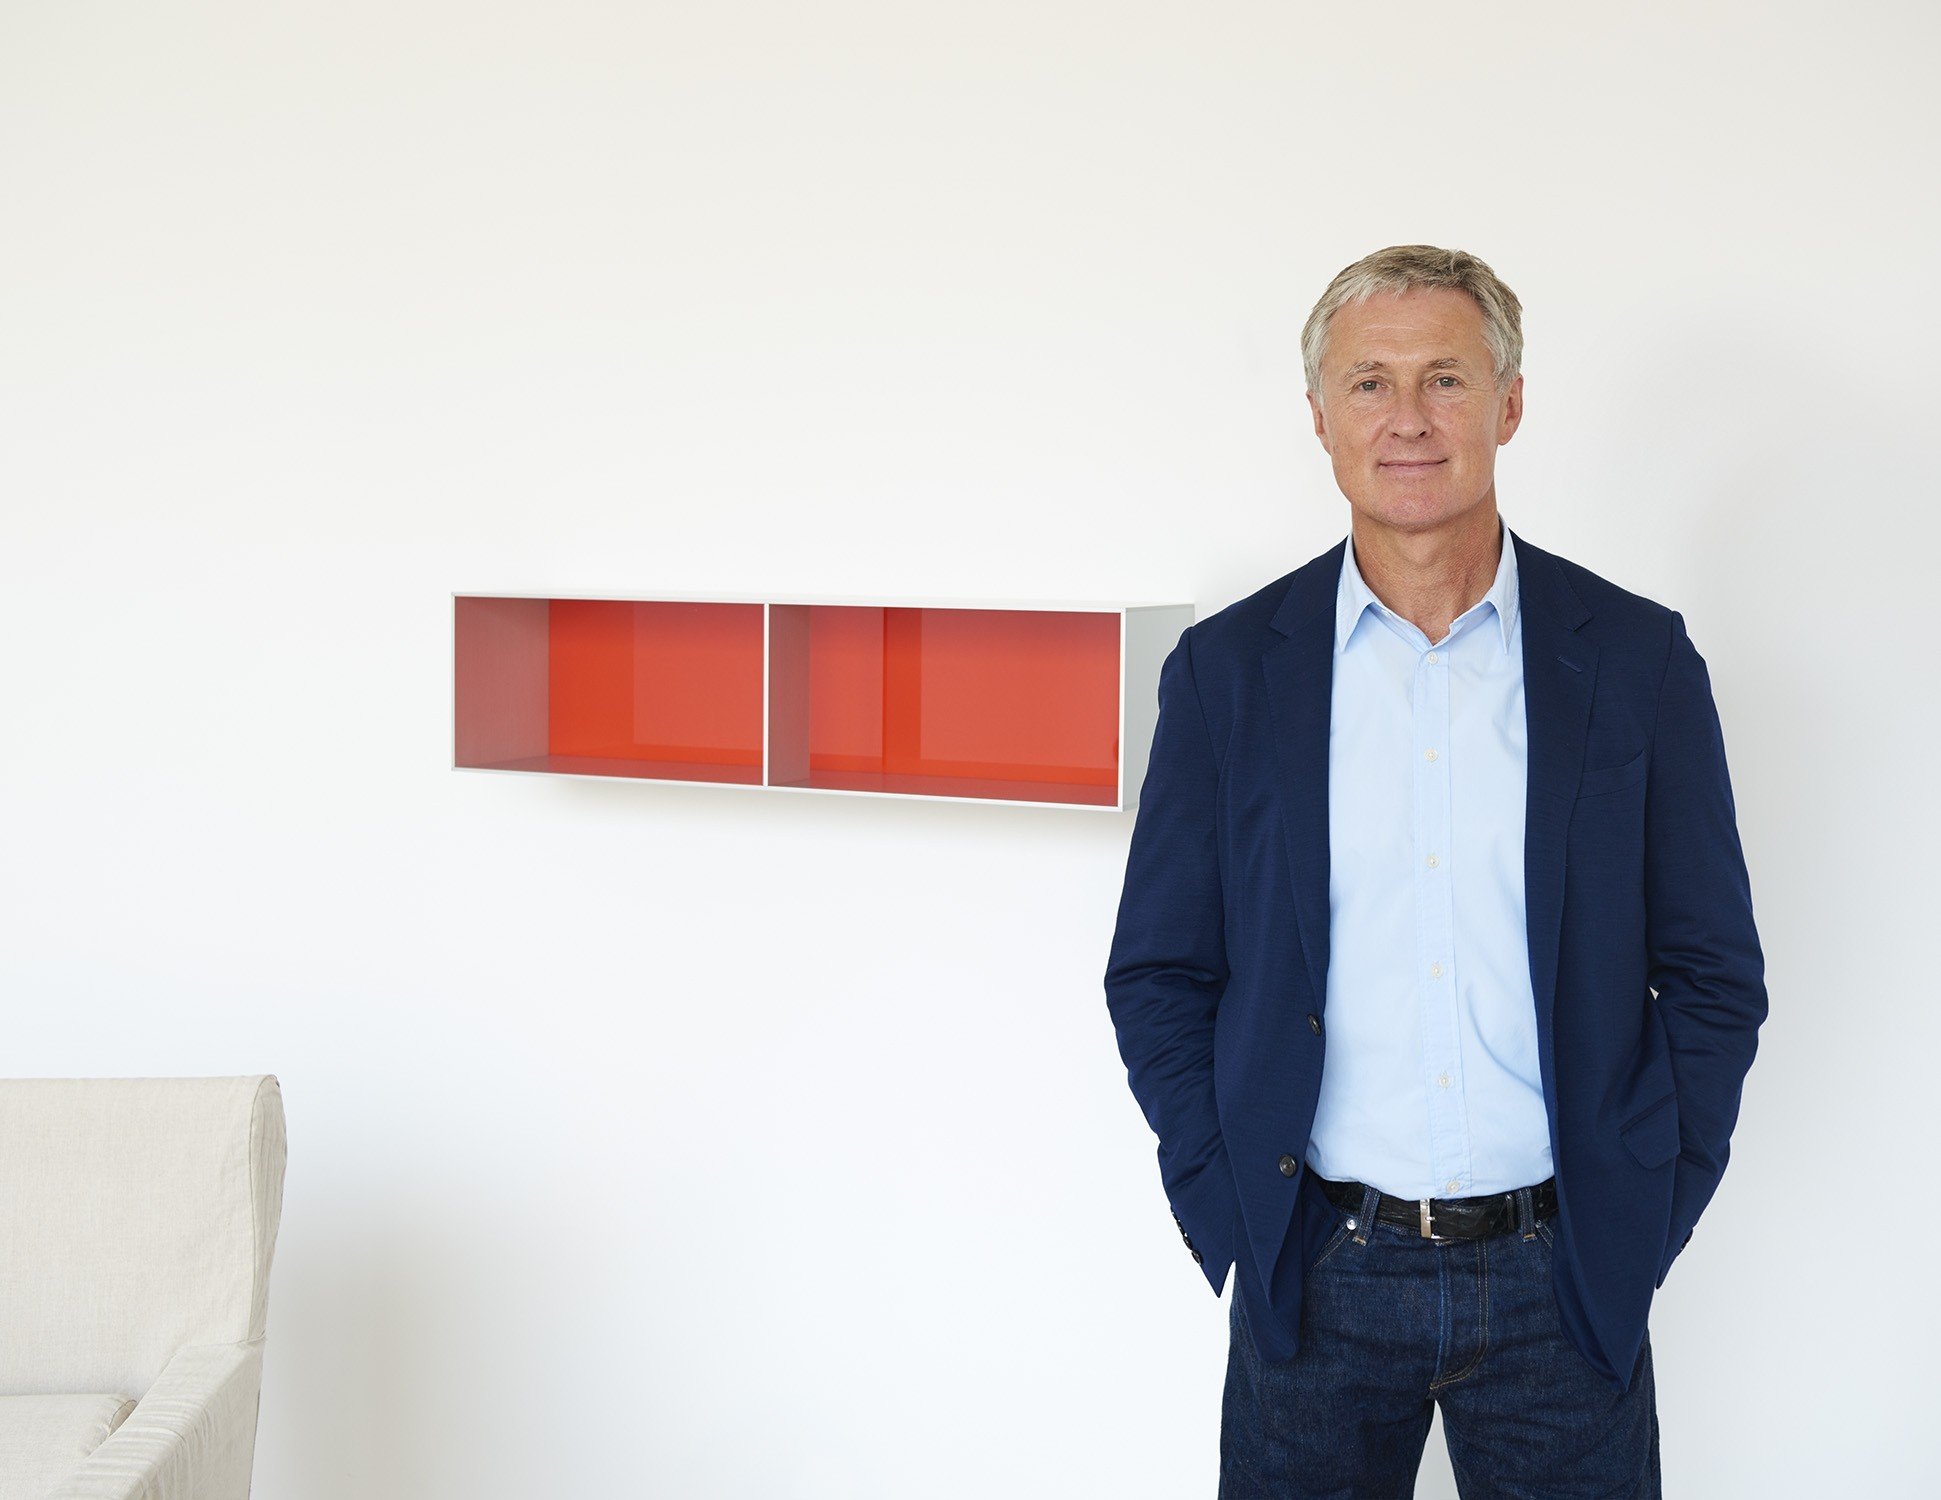 David Zwirner is known for his love of challenging artists. Photo: handout